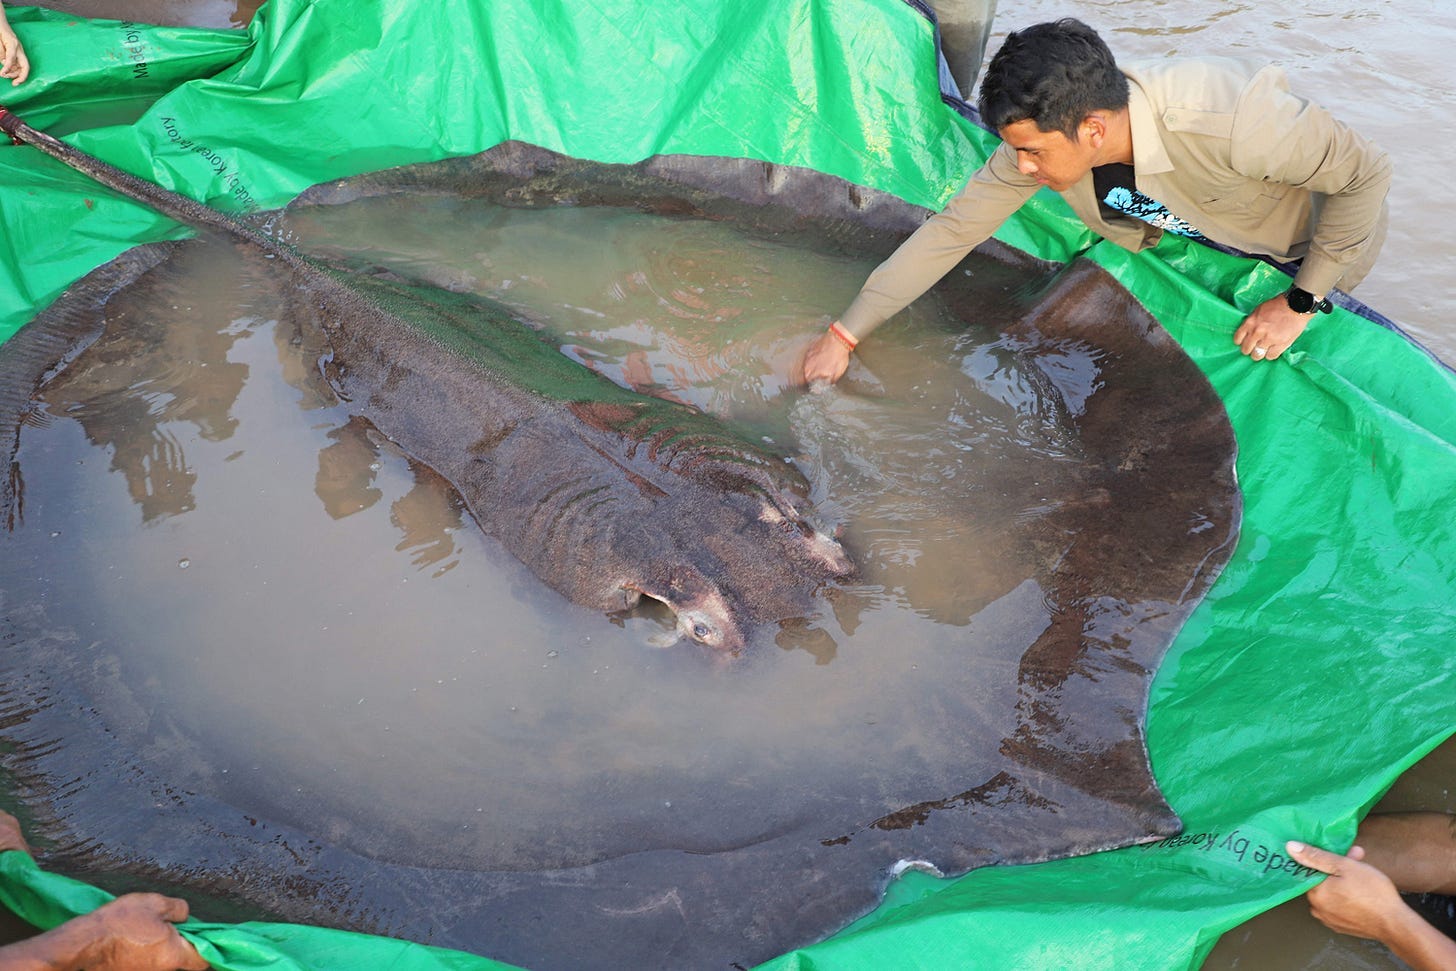 Huge Stingray Becomes World's Largest Freshwater Fish Ever Recorded |  PEOPLE.com